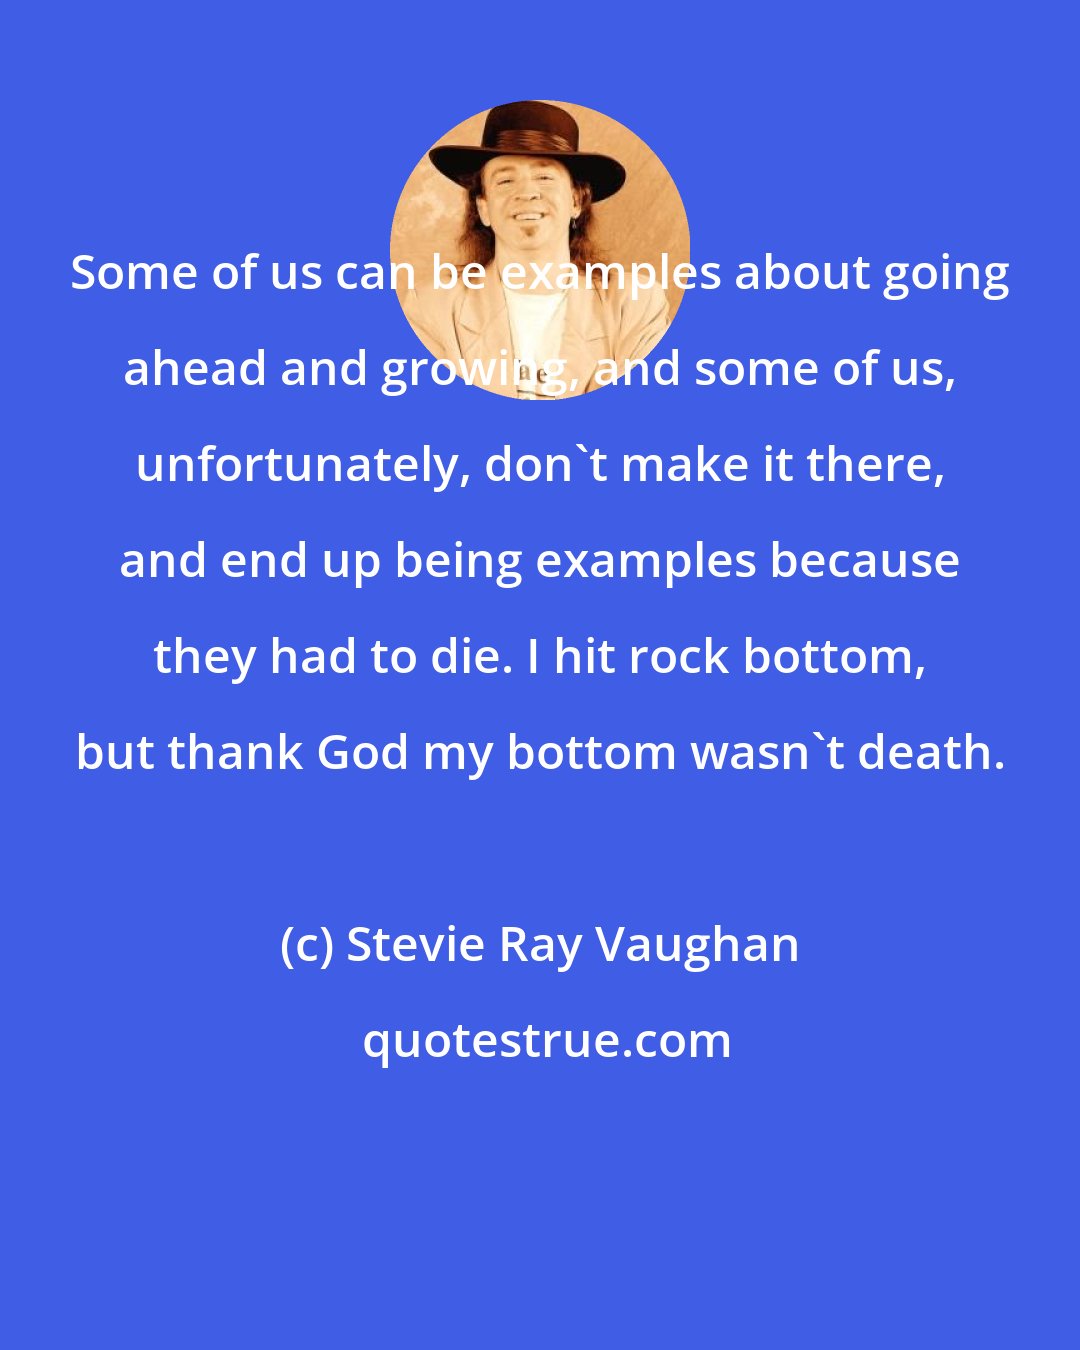 Stevie Ray Vaughan: Some of us can be examples about going ahead and growing, and some of us, unfortunately, don't make it there, and end up being examples because they had to die. I hit rock bottom, but thank God my bottom wasn't death.